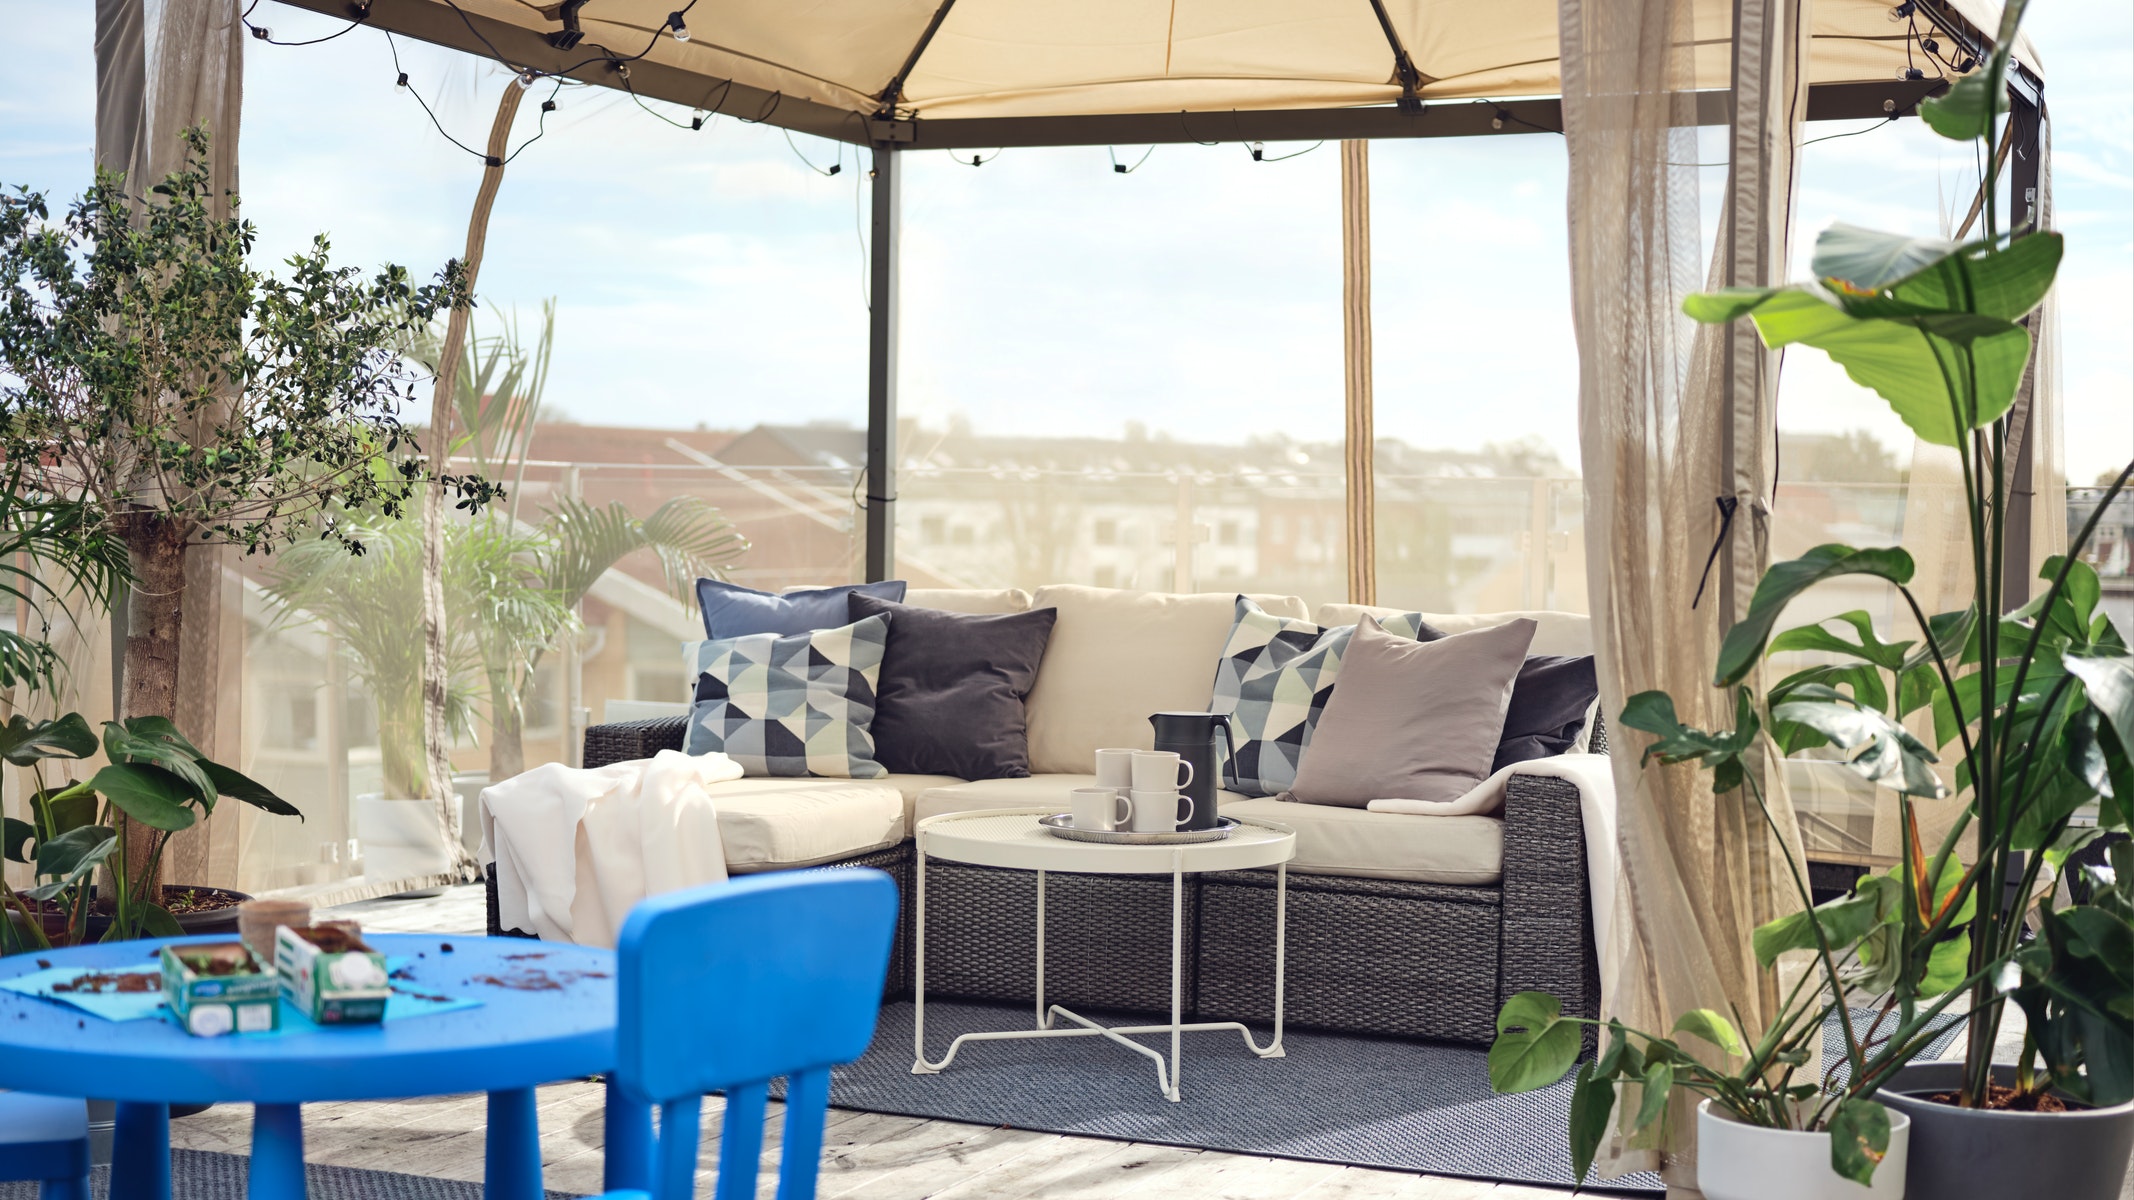 IKEA - A rooftop terrace with space for everyone